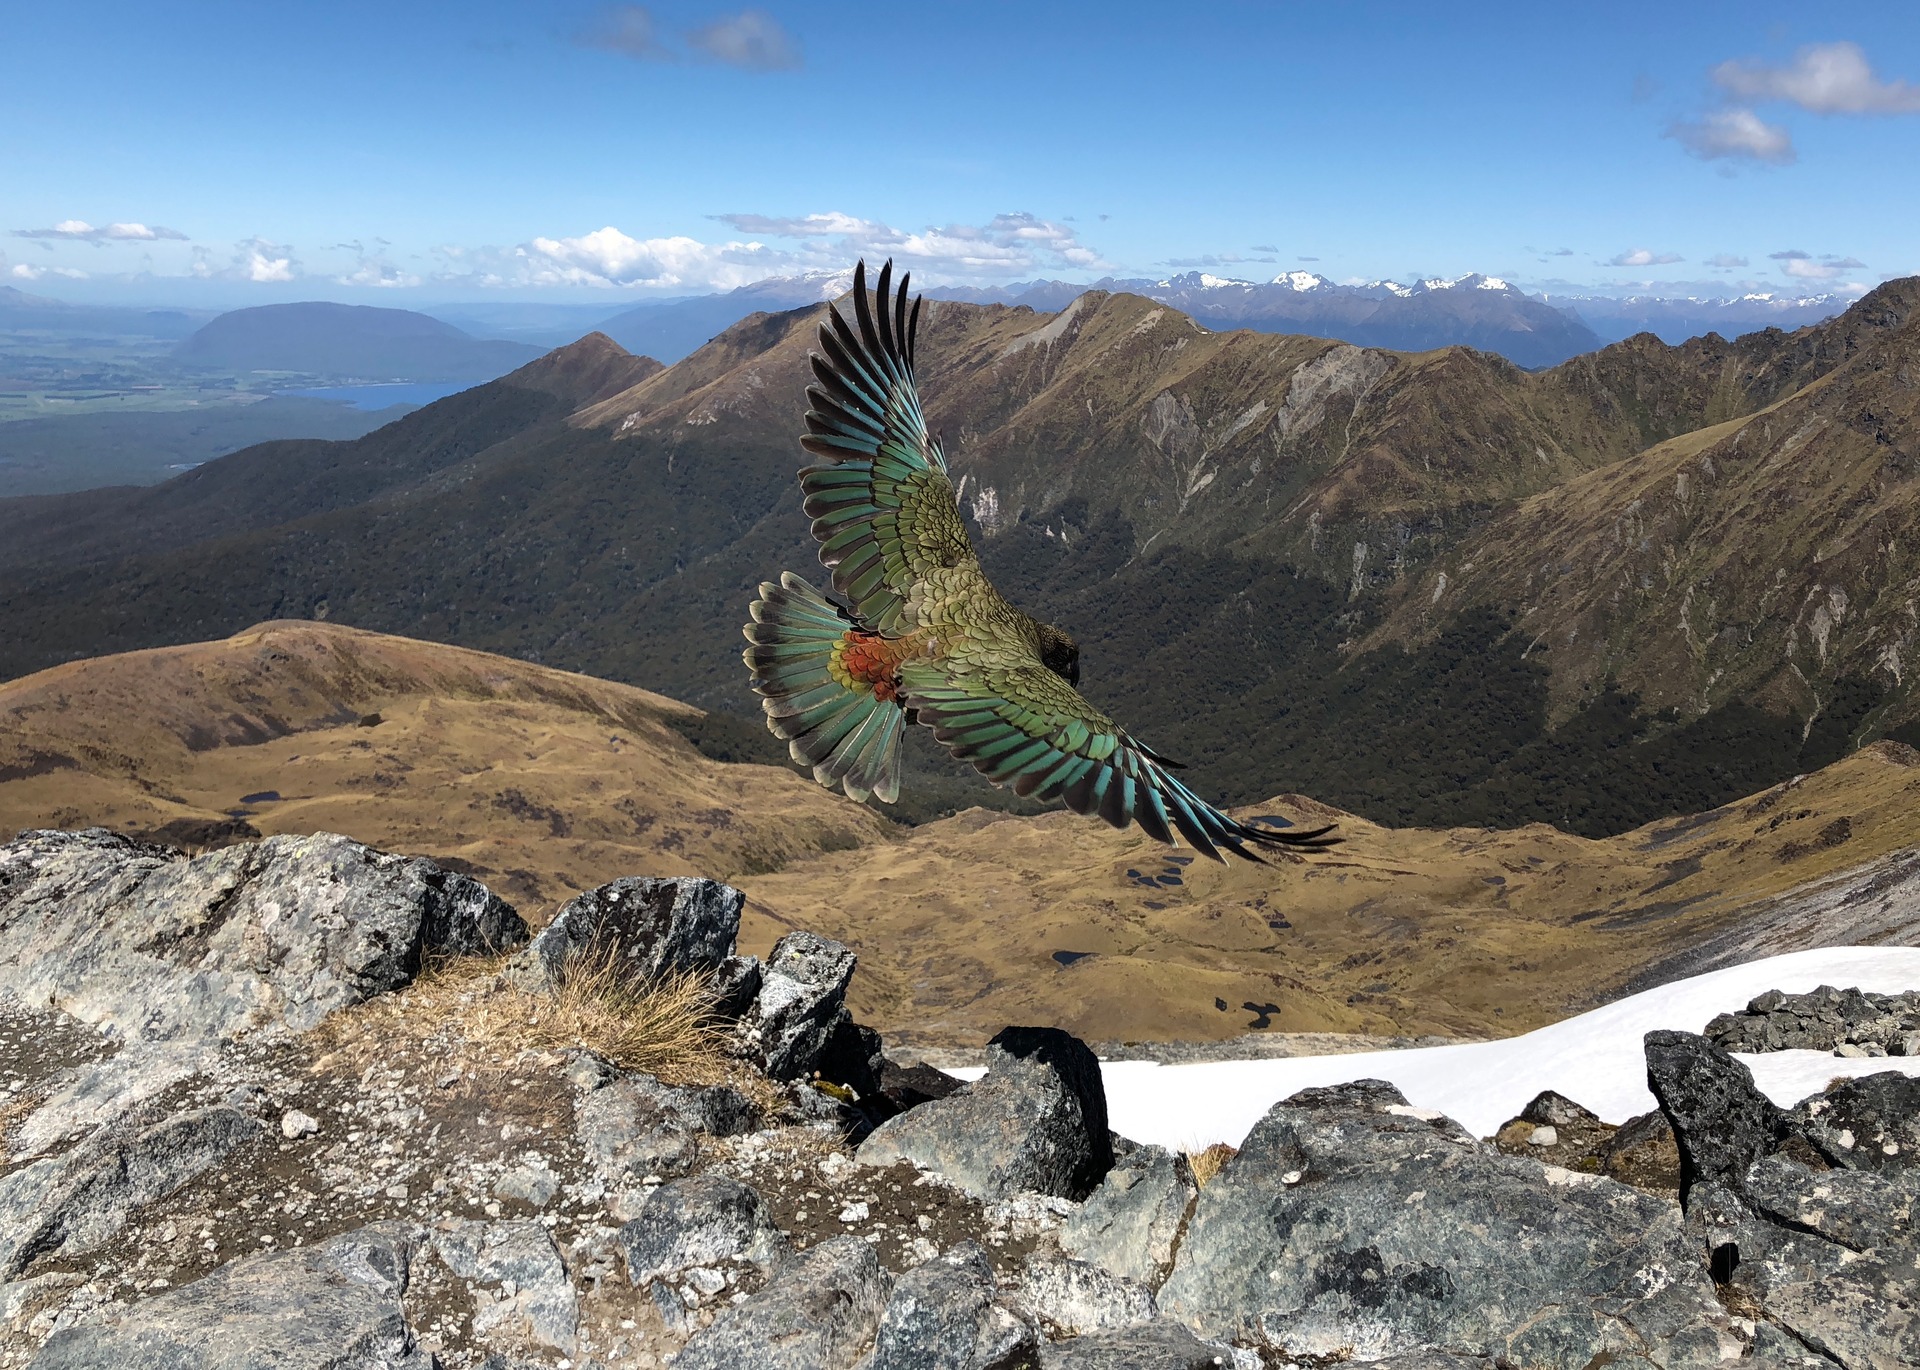 Kea ora! Tourist captures 'once in a lifetime' photos at New Zealand's Kepler  Track - NZ Herald